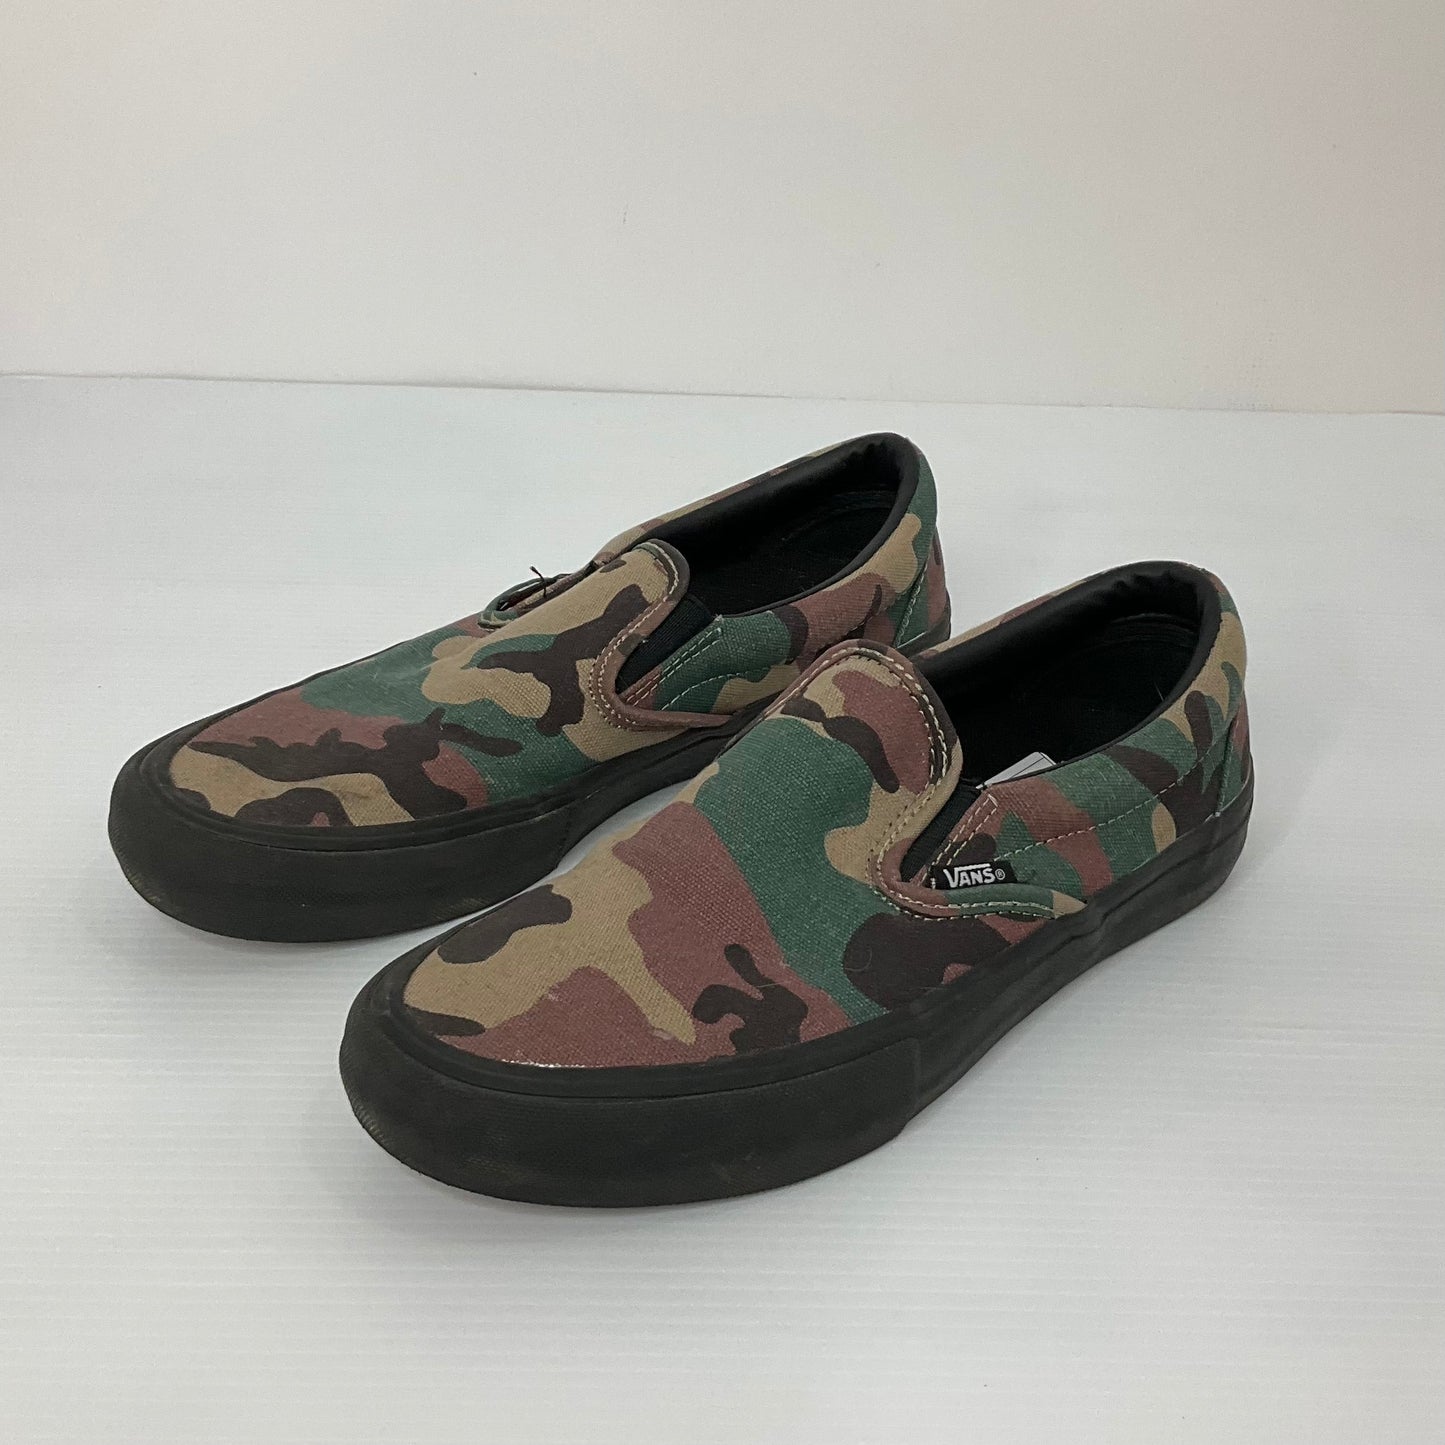 Camouflage Print Shoes Sneakers Vans, Size 9.5